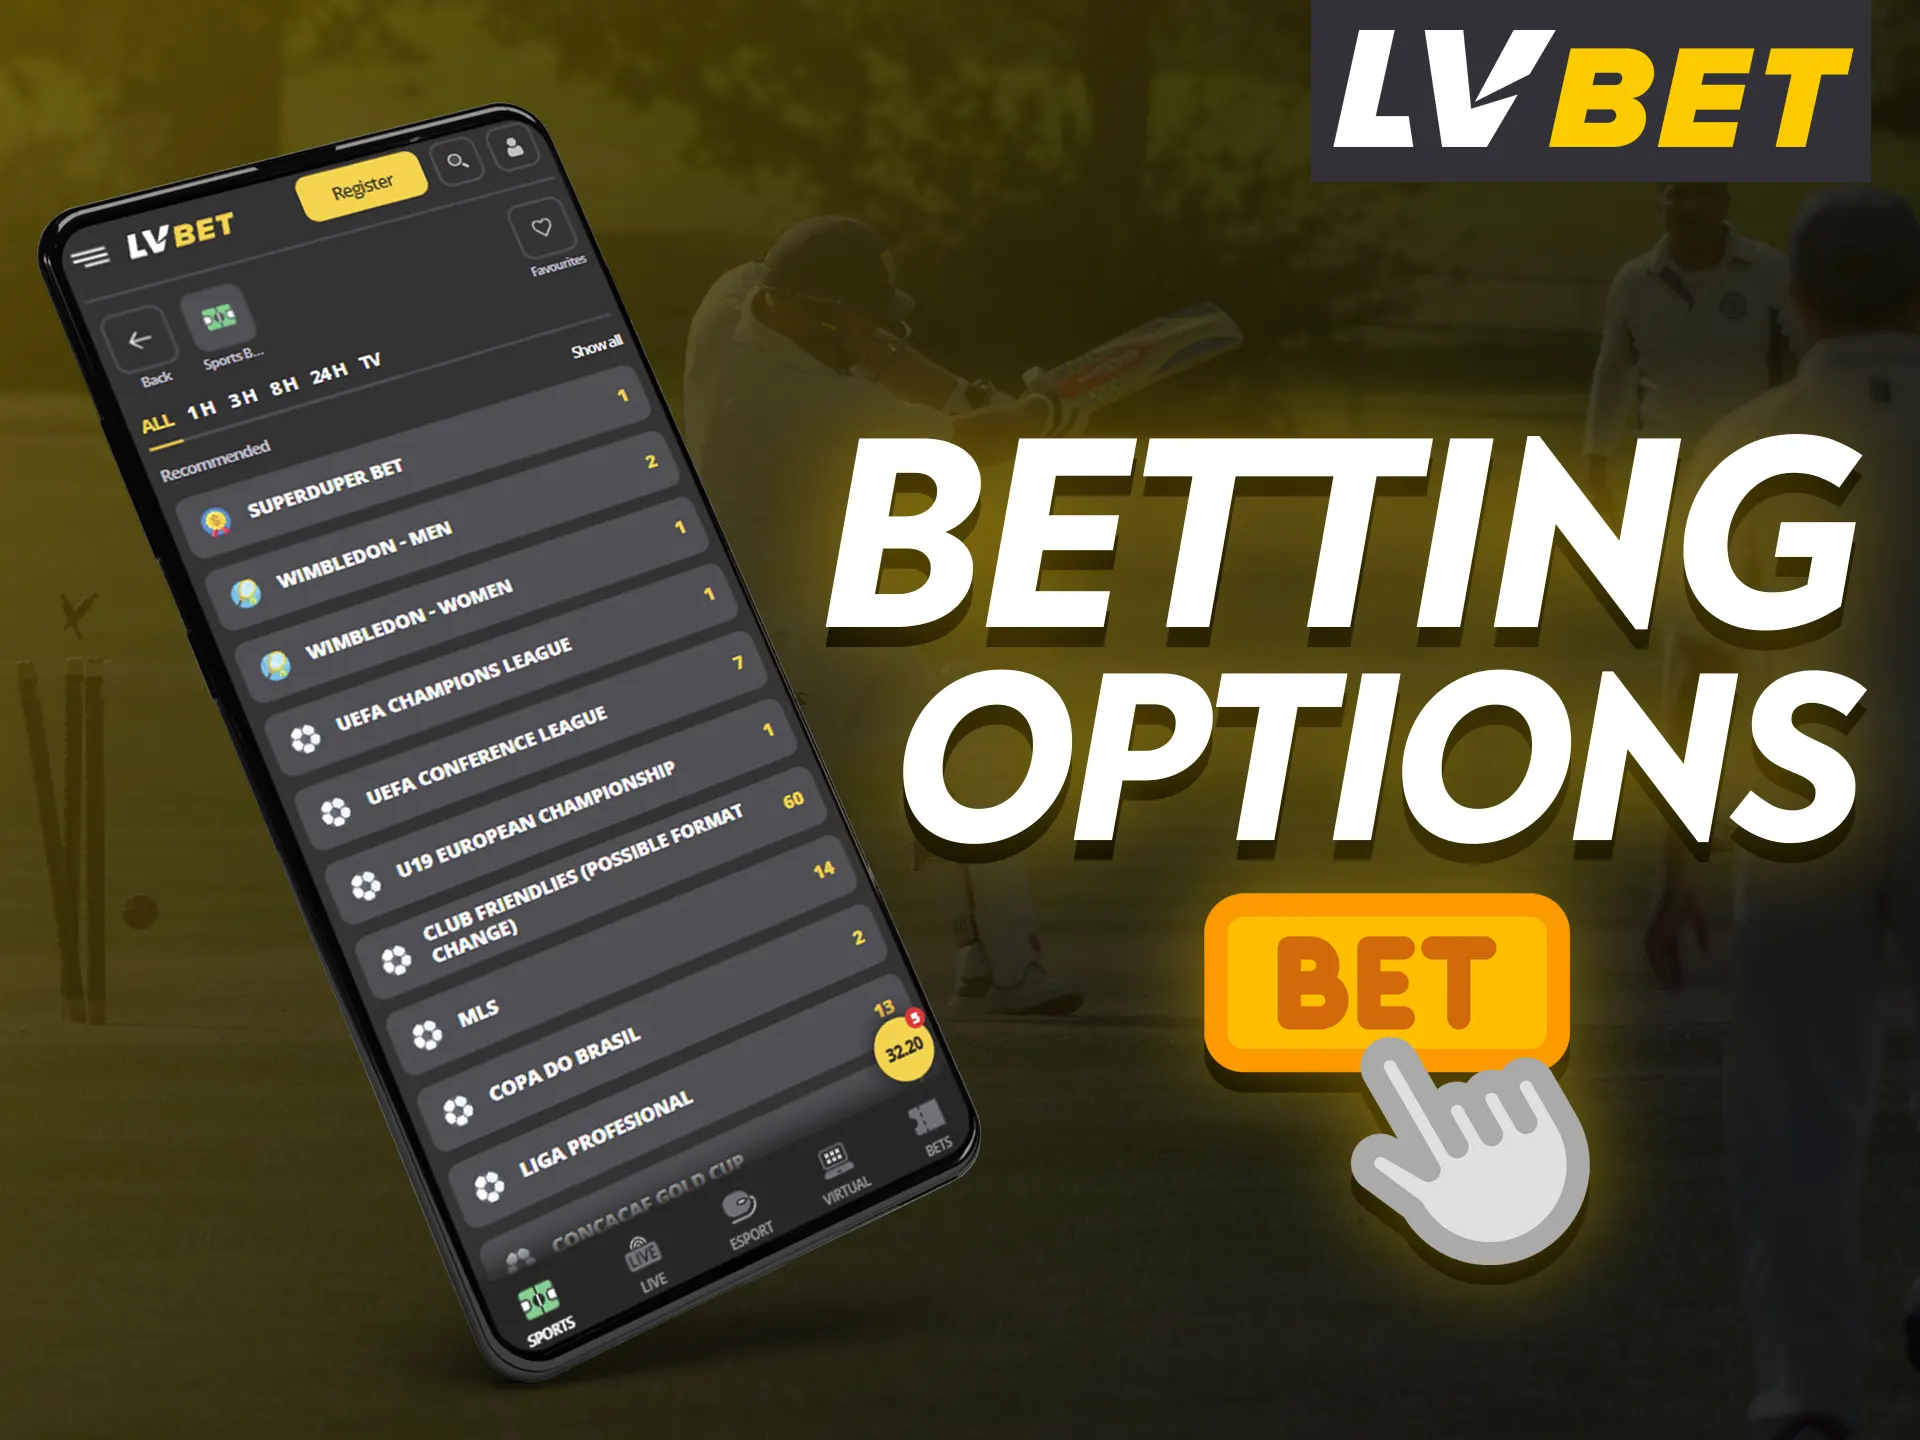 Try all the options for sports betting on the LV Bet app.